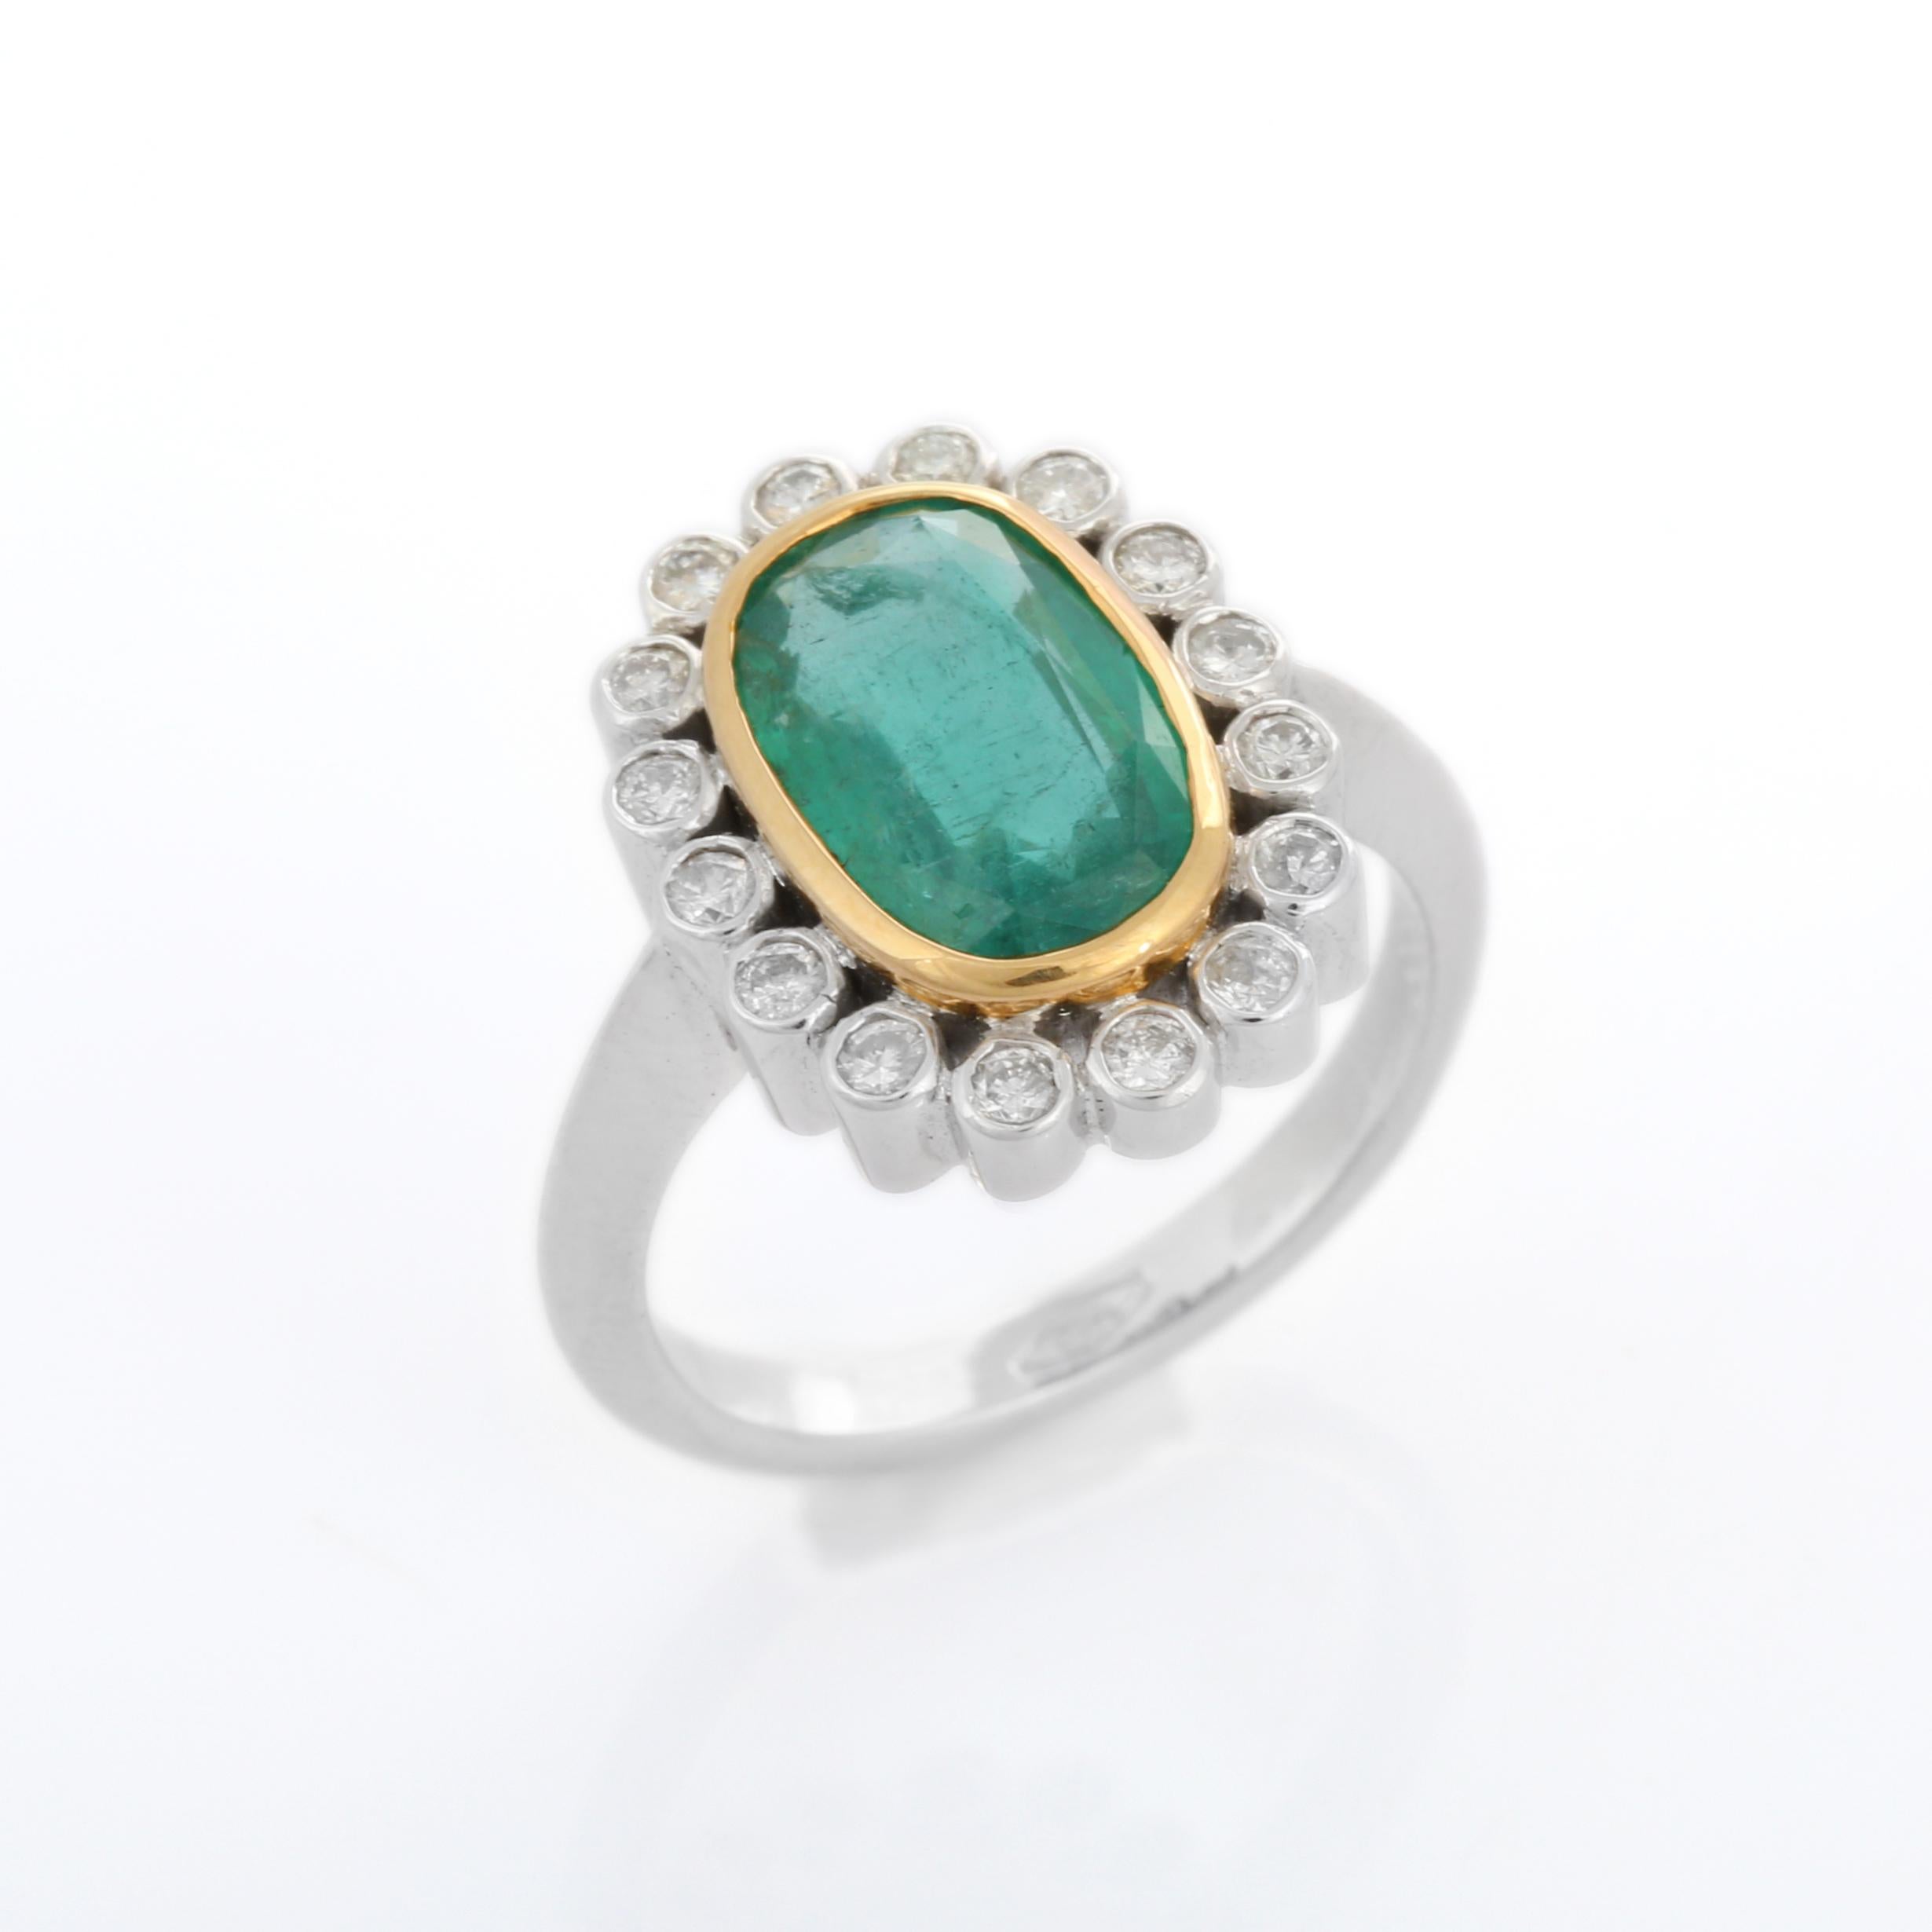 For Sale:  18K White Gold Emerald and Diamond Cocktail Ring  7